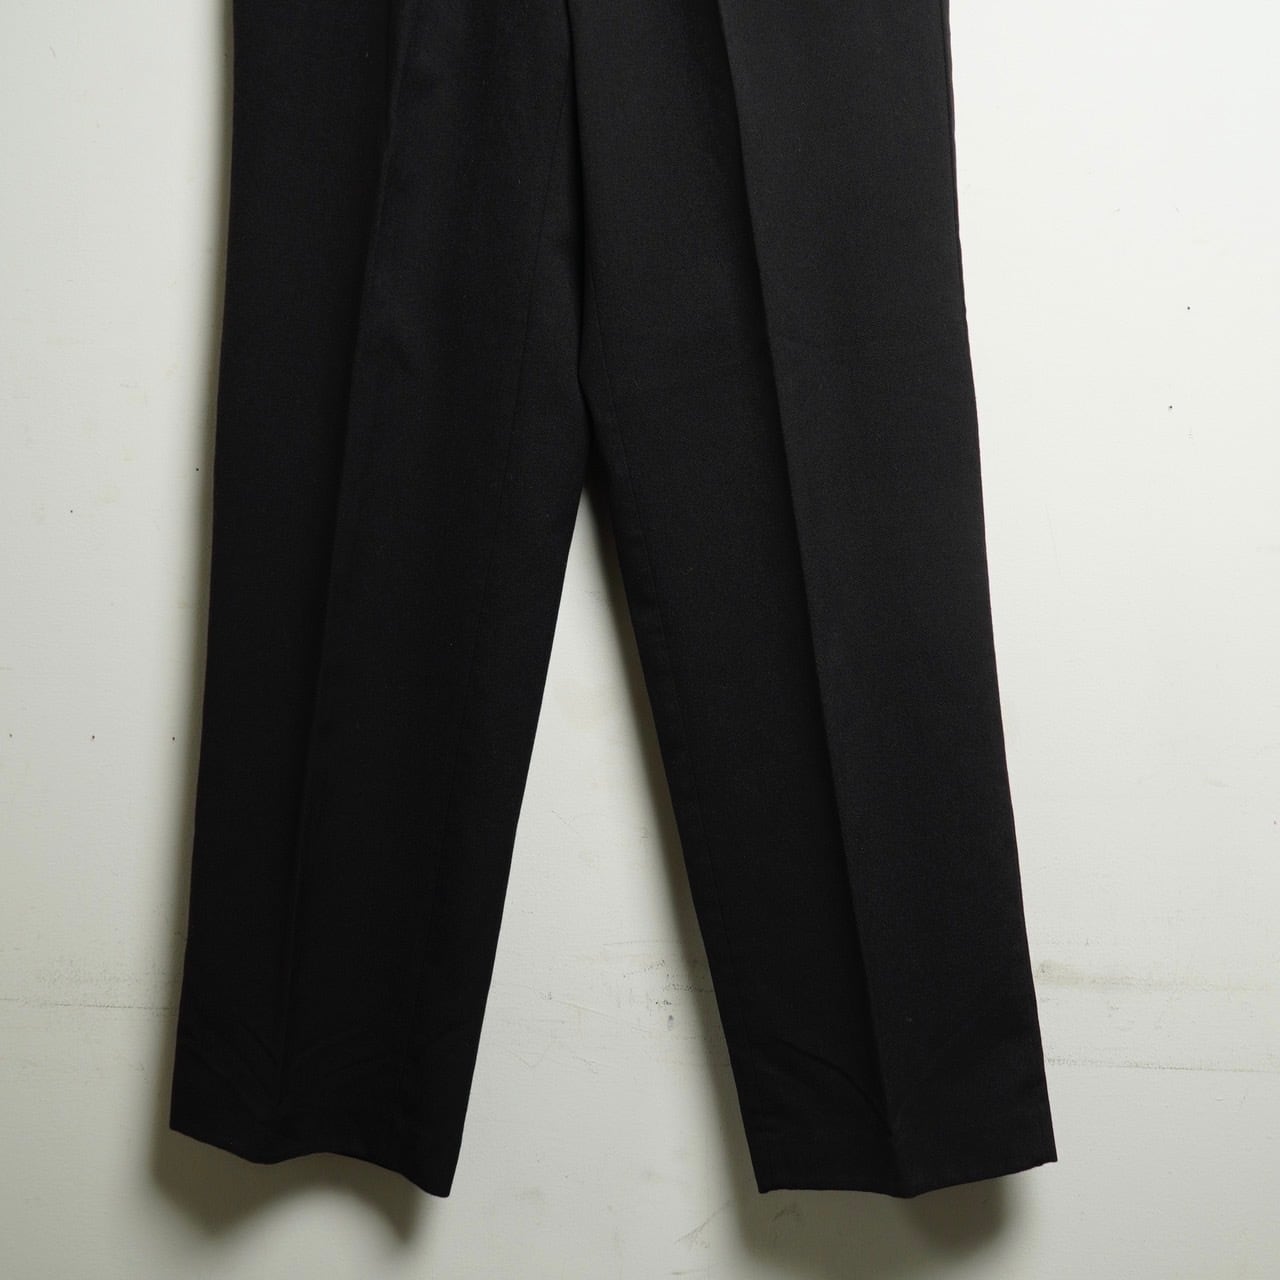 Royal Navy No.3 Black Dress Trousers   AMICI used vintage clothing